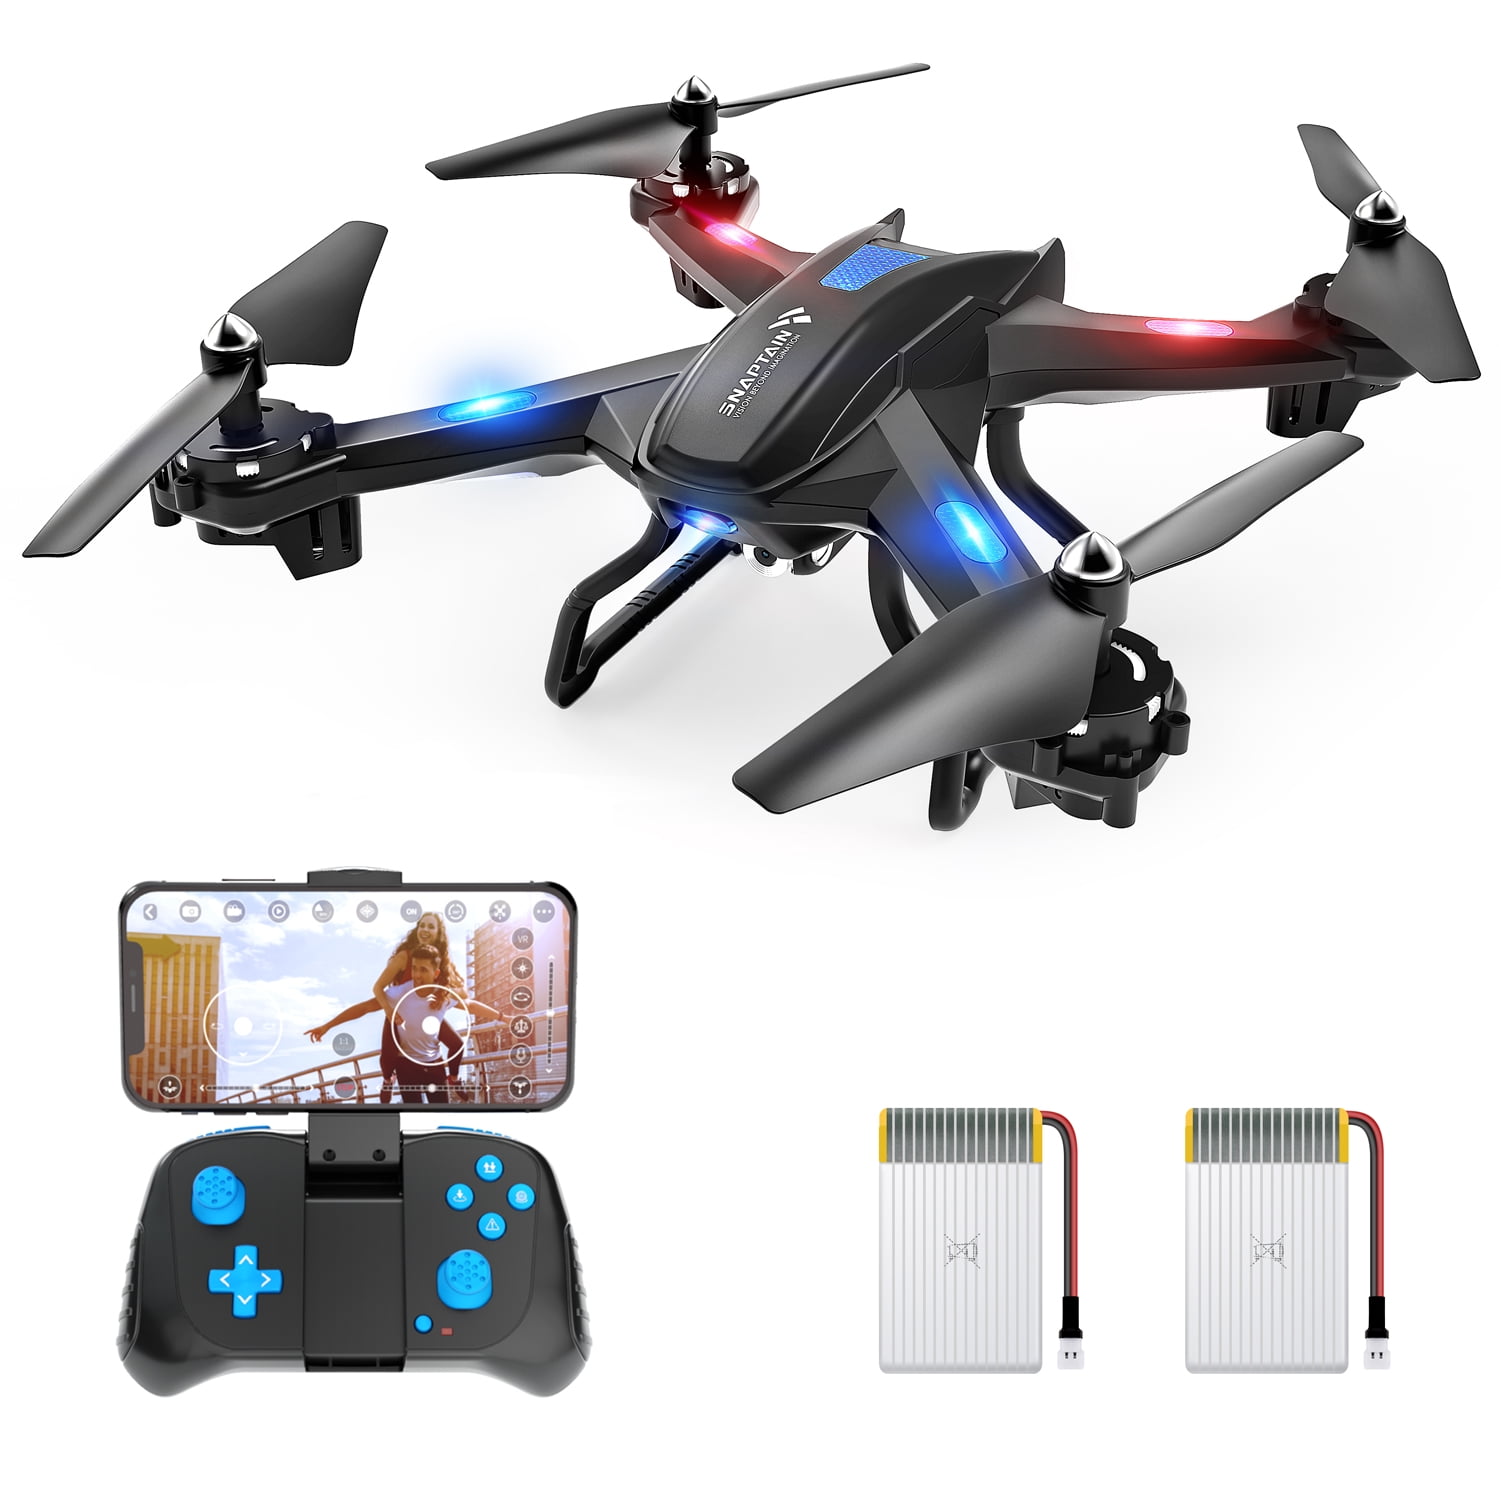 Compatible w/VR Headset TOPVISION WiFi FPV Drone with 720P HD Camera & 480P Bottom Camera Wide-Angle Live Video RC Quadcopter with Altitude Hold One Key Take Off/Landing 